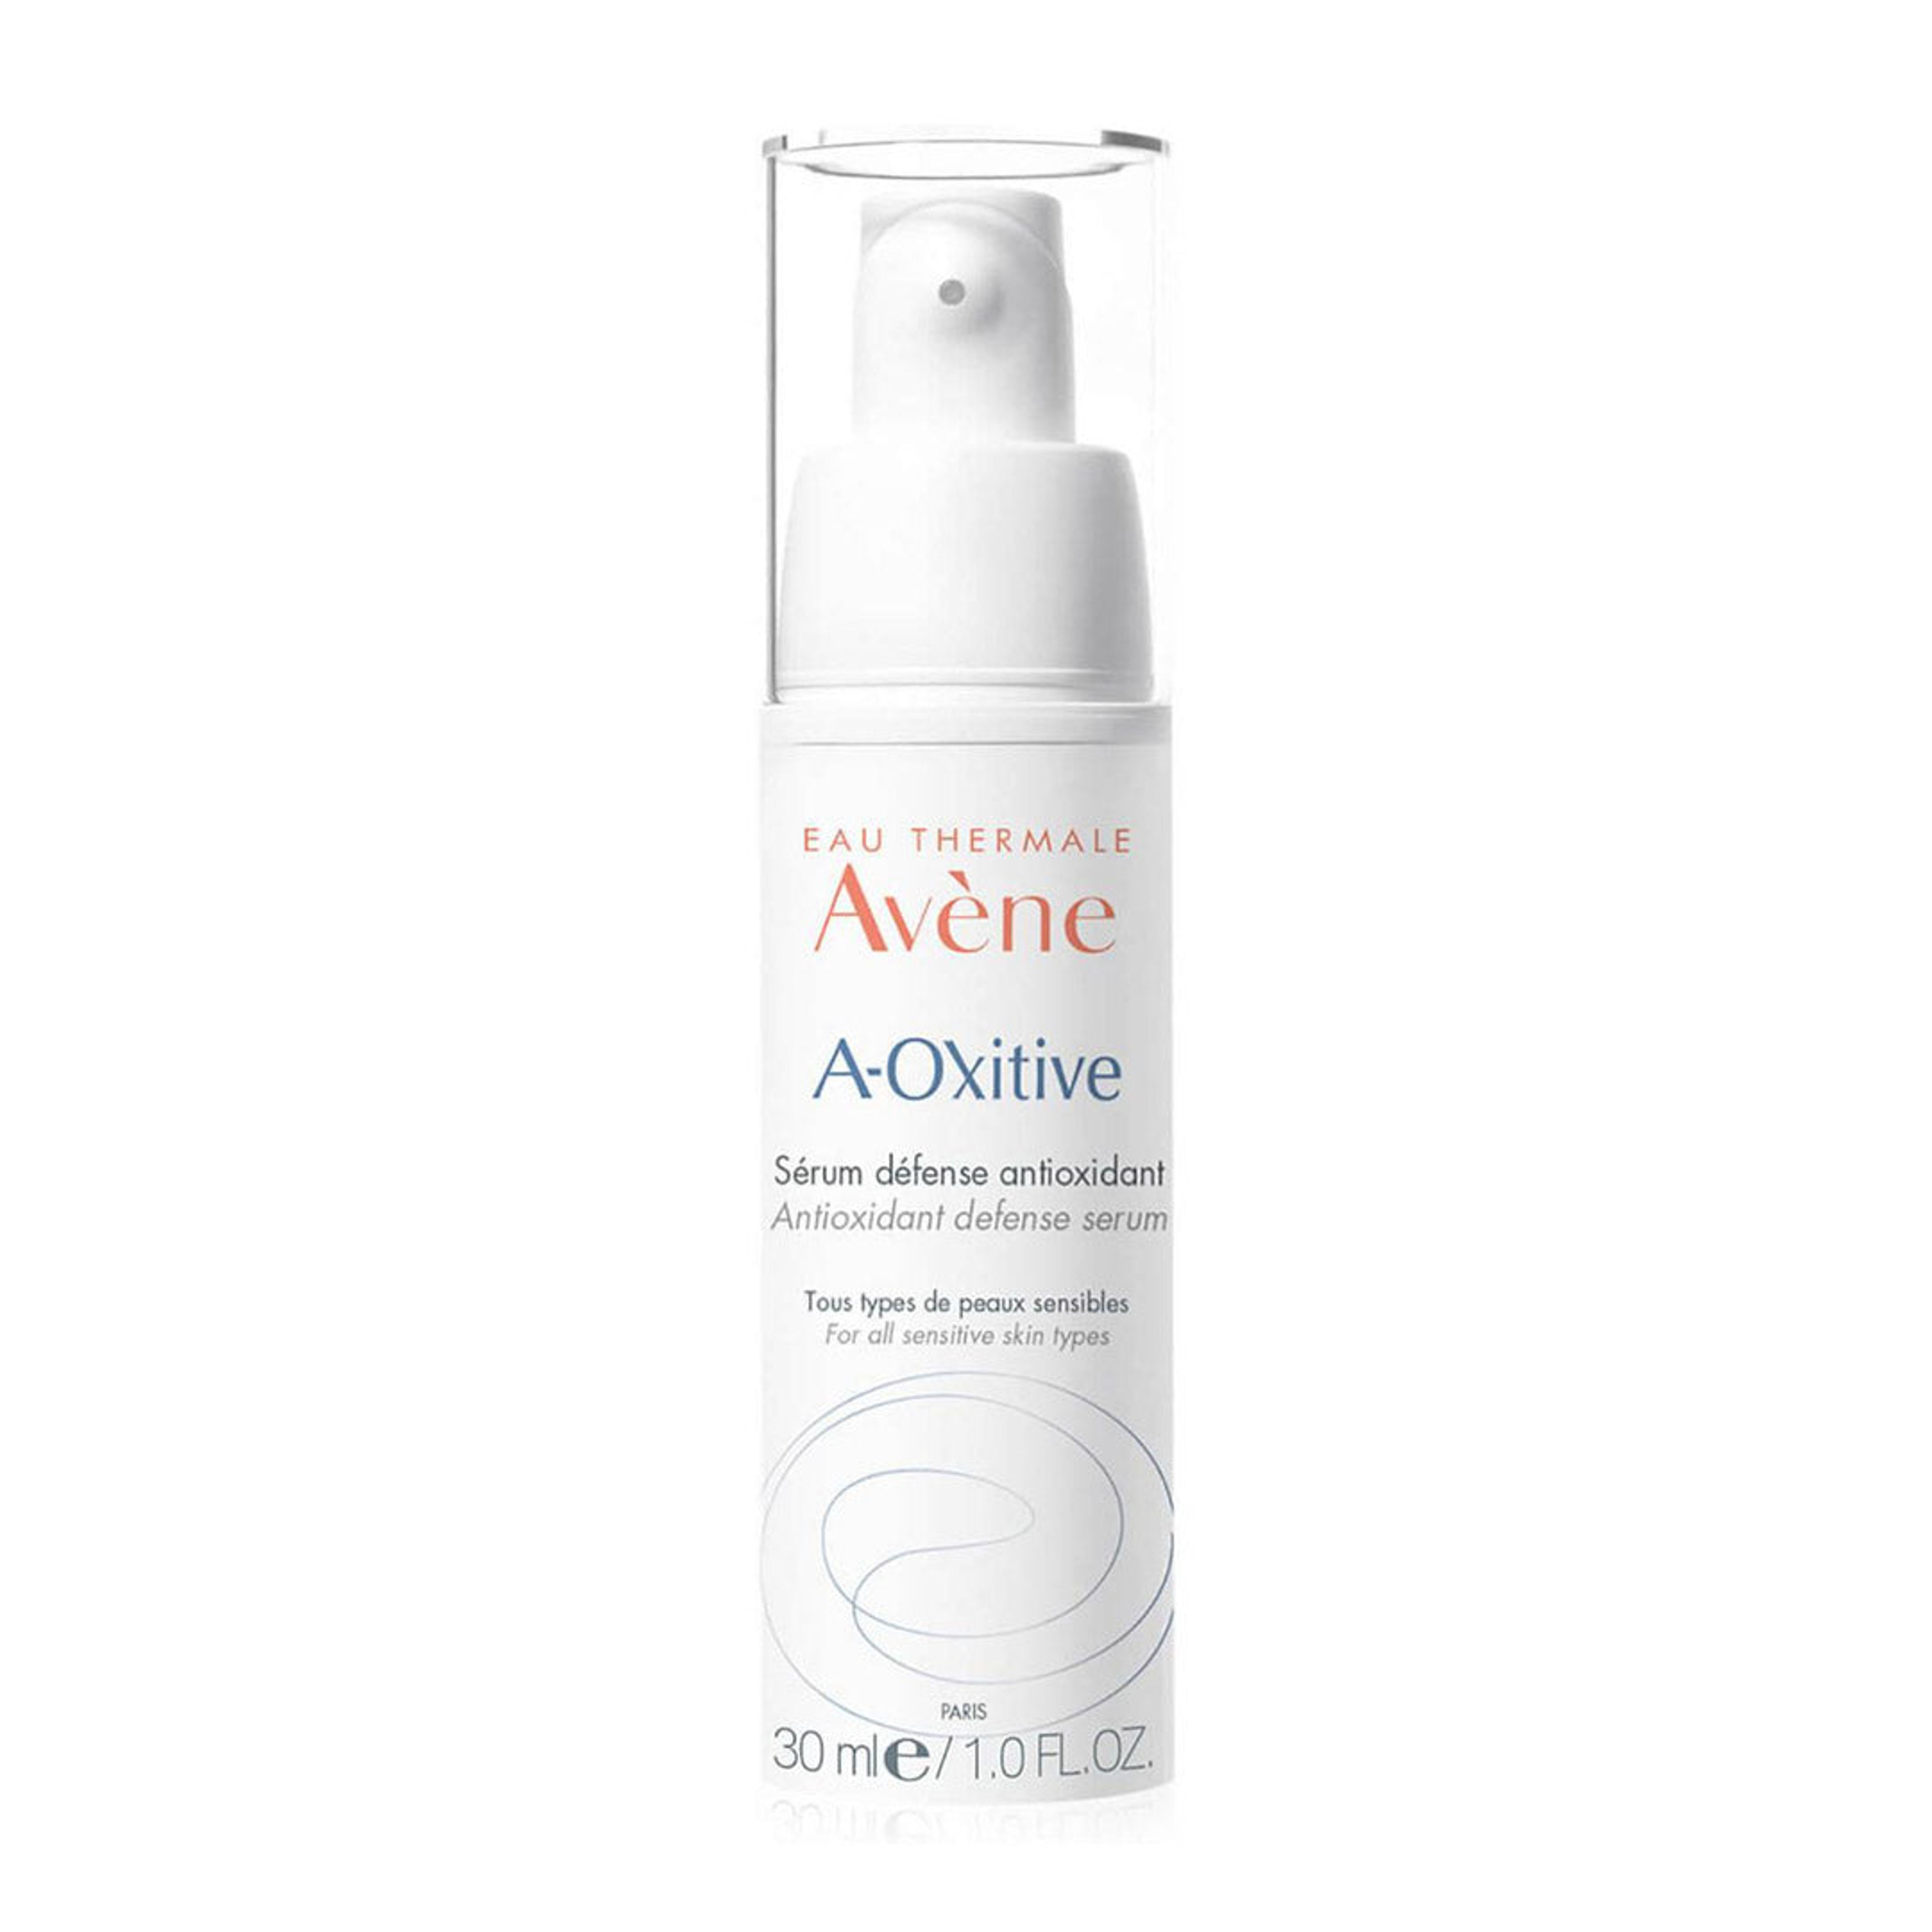 A-Oxitive Antioxidant Defense Serum for First Signs of Ageing